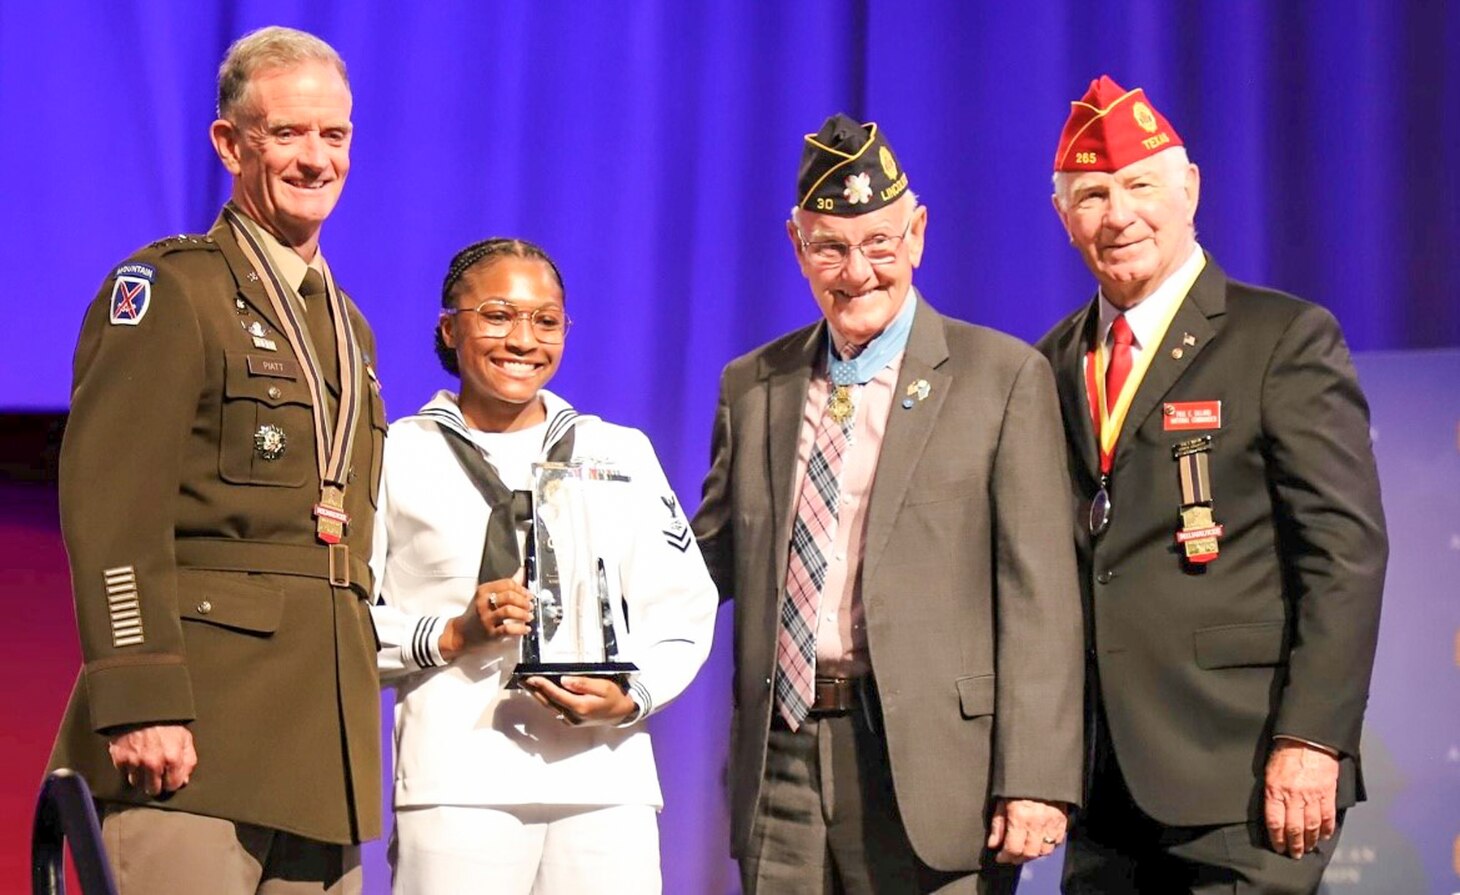 Information Systems Technician 1st Class Annie Holder was presented the Spirit of Service Award from top leaders of the American Legion at the their 103rd National Convention in Milwaukee, Wis. Holder is currently stationed at Information Warfare Training Command Virginia Beach, where she serves as a system administrator instructor.